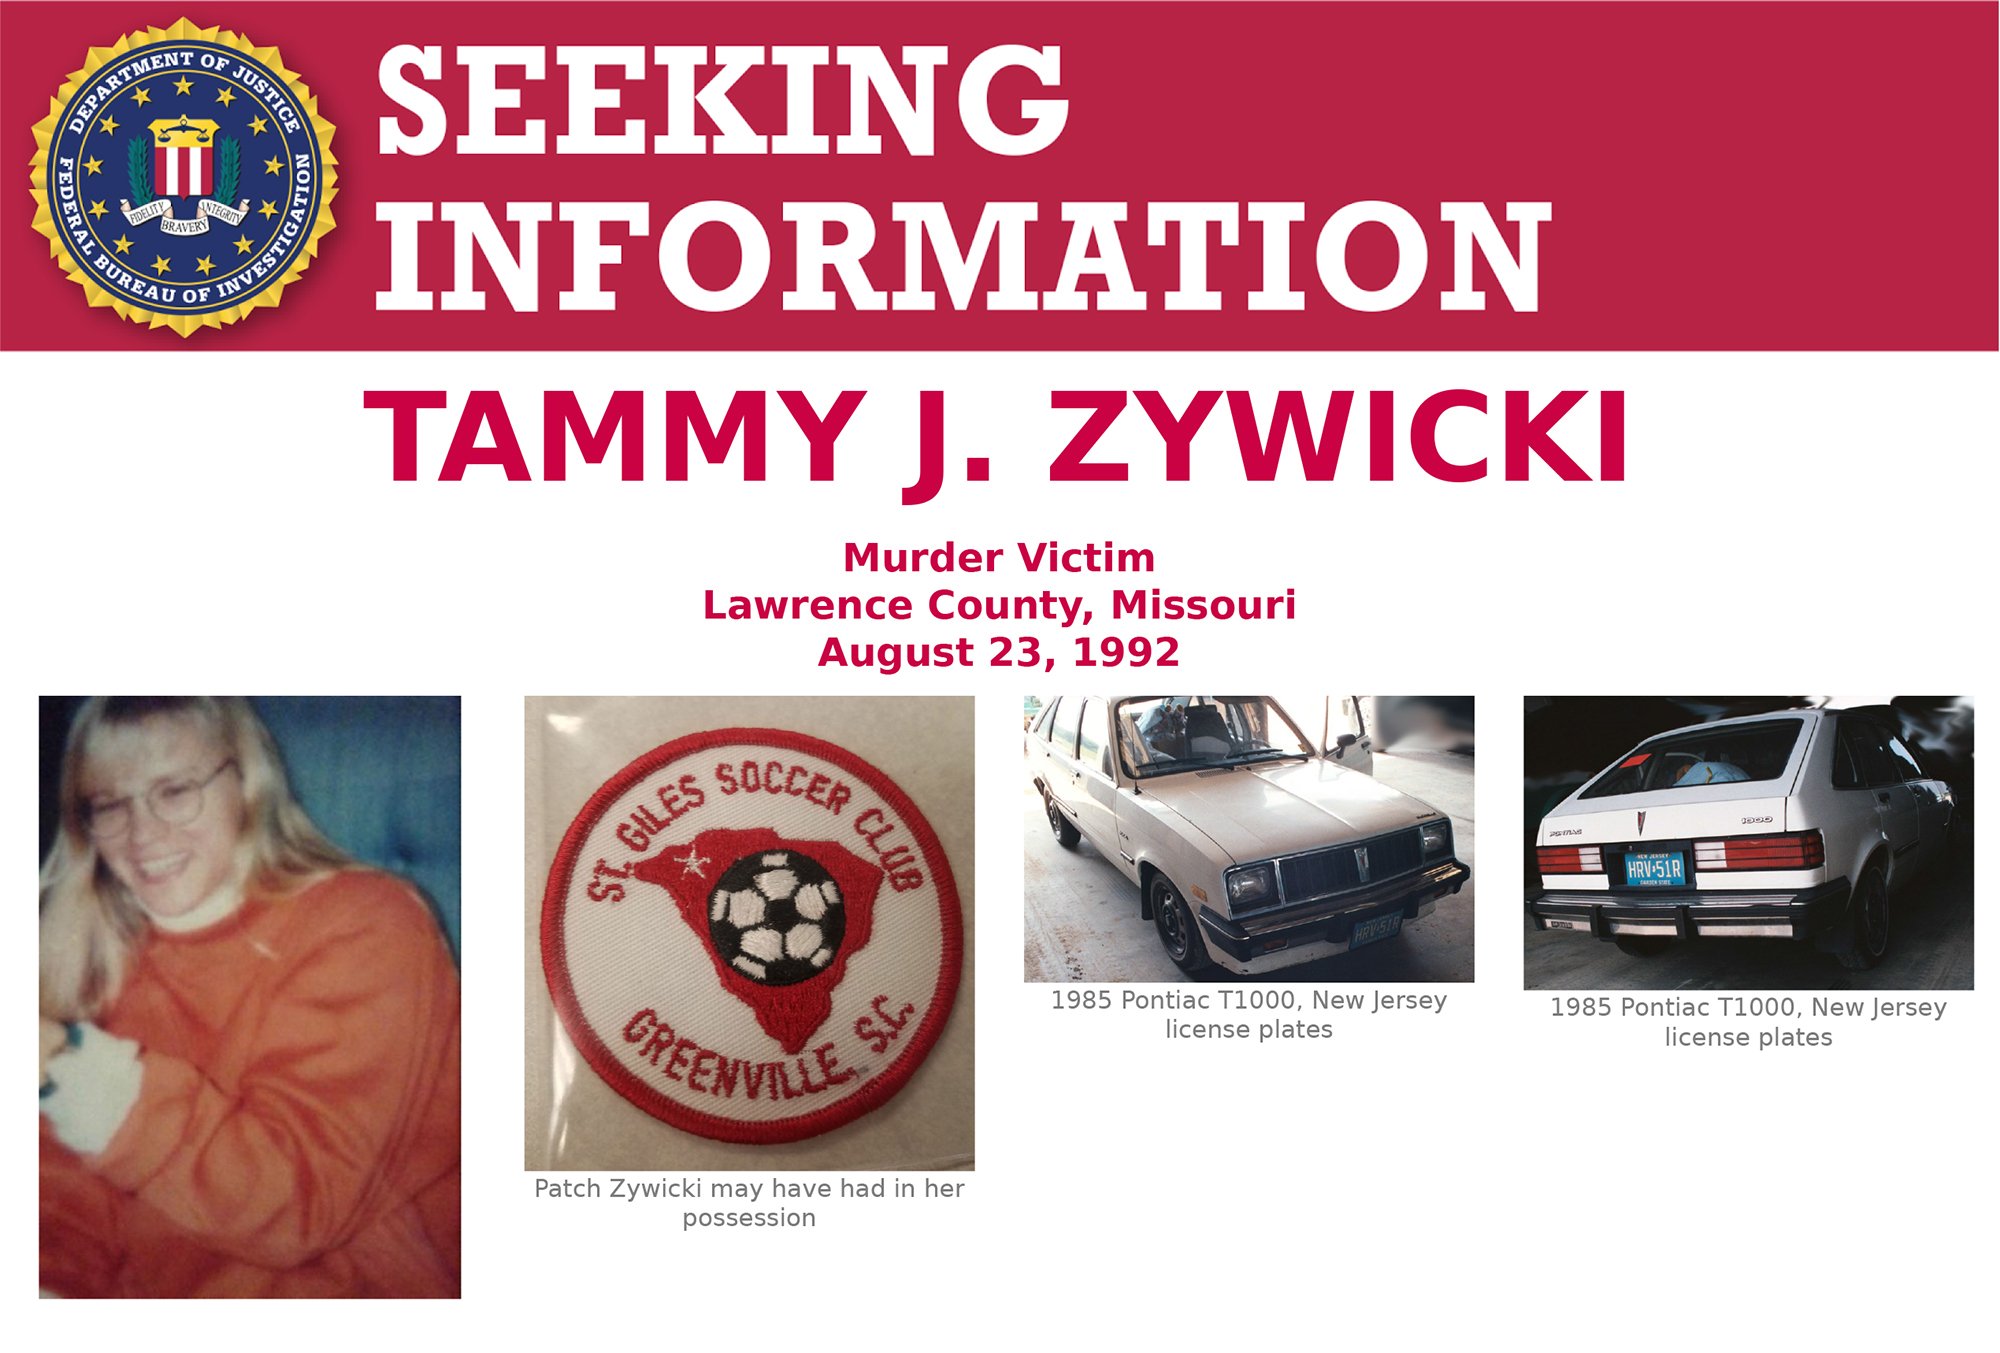 Screenshot showing top part of Tammy Zywicki’s Seeking Information poster. Zywicki was murdered August 23, 1992, and the case remains unsolved 25 years later.